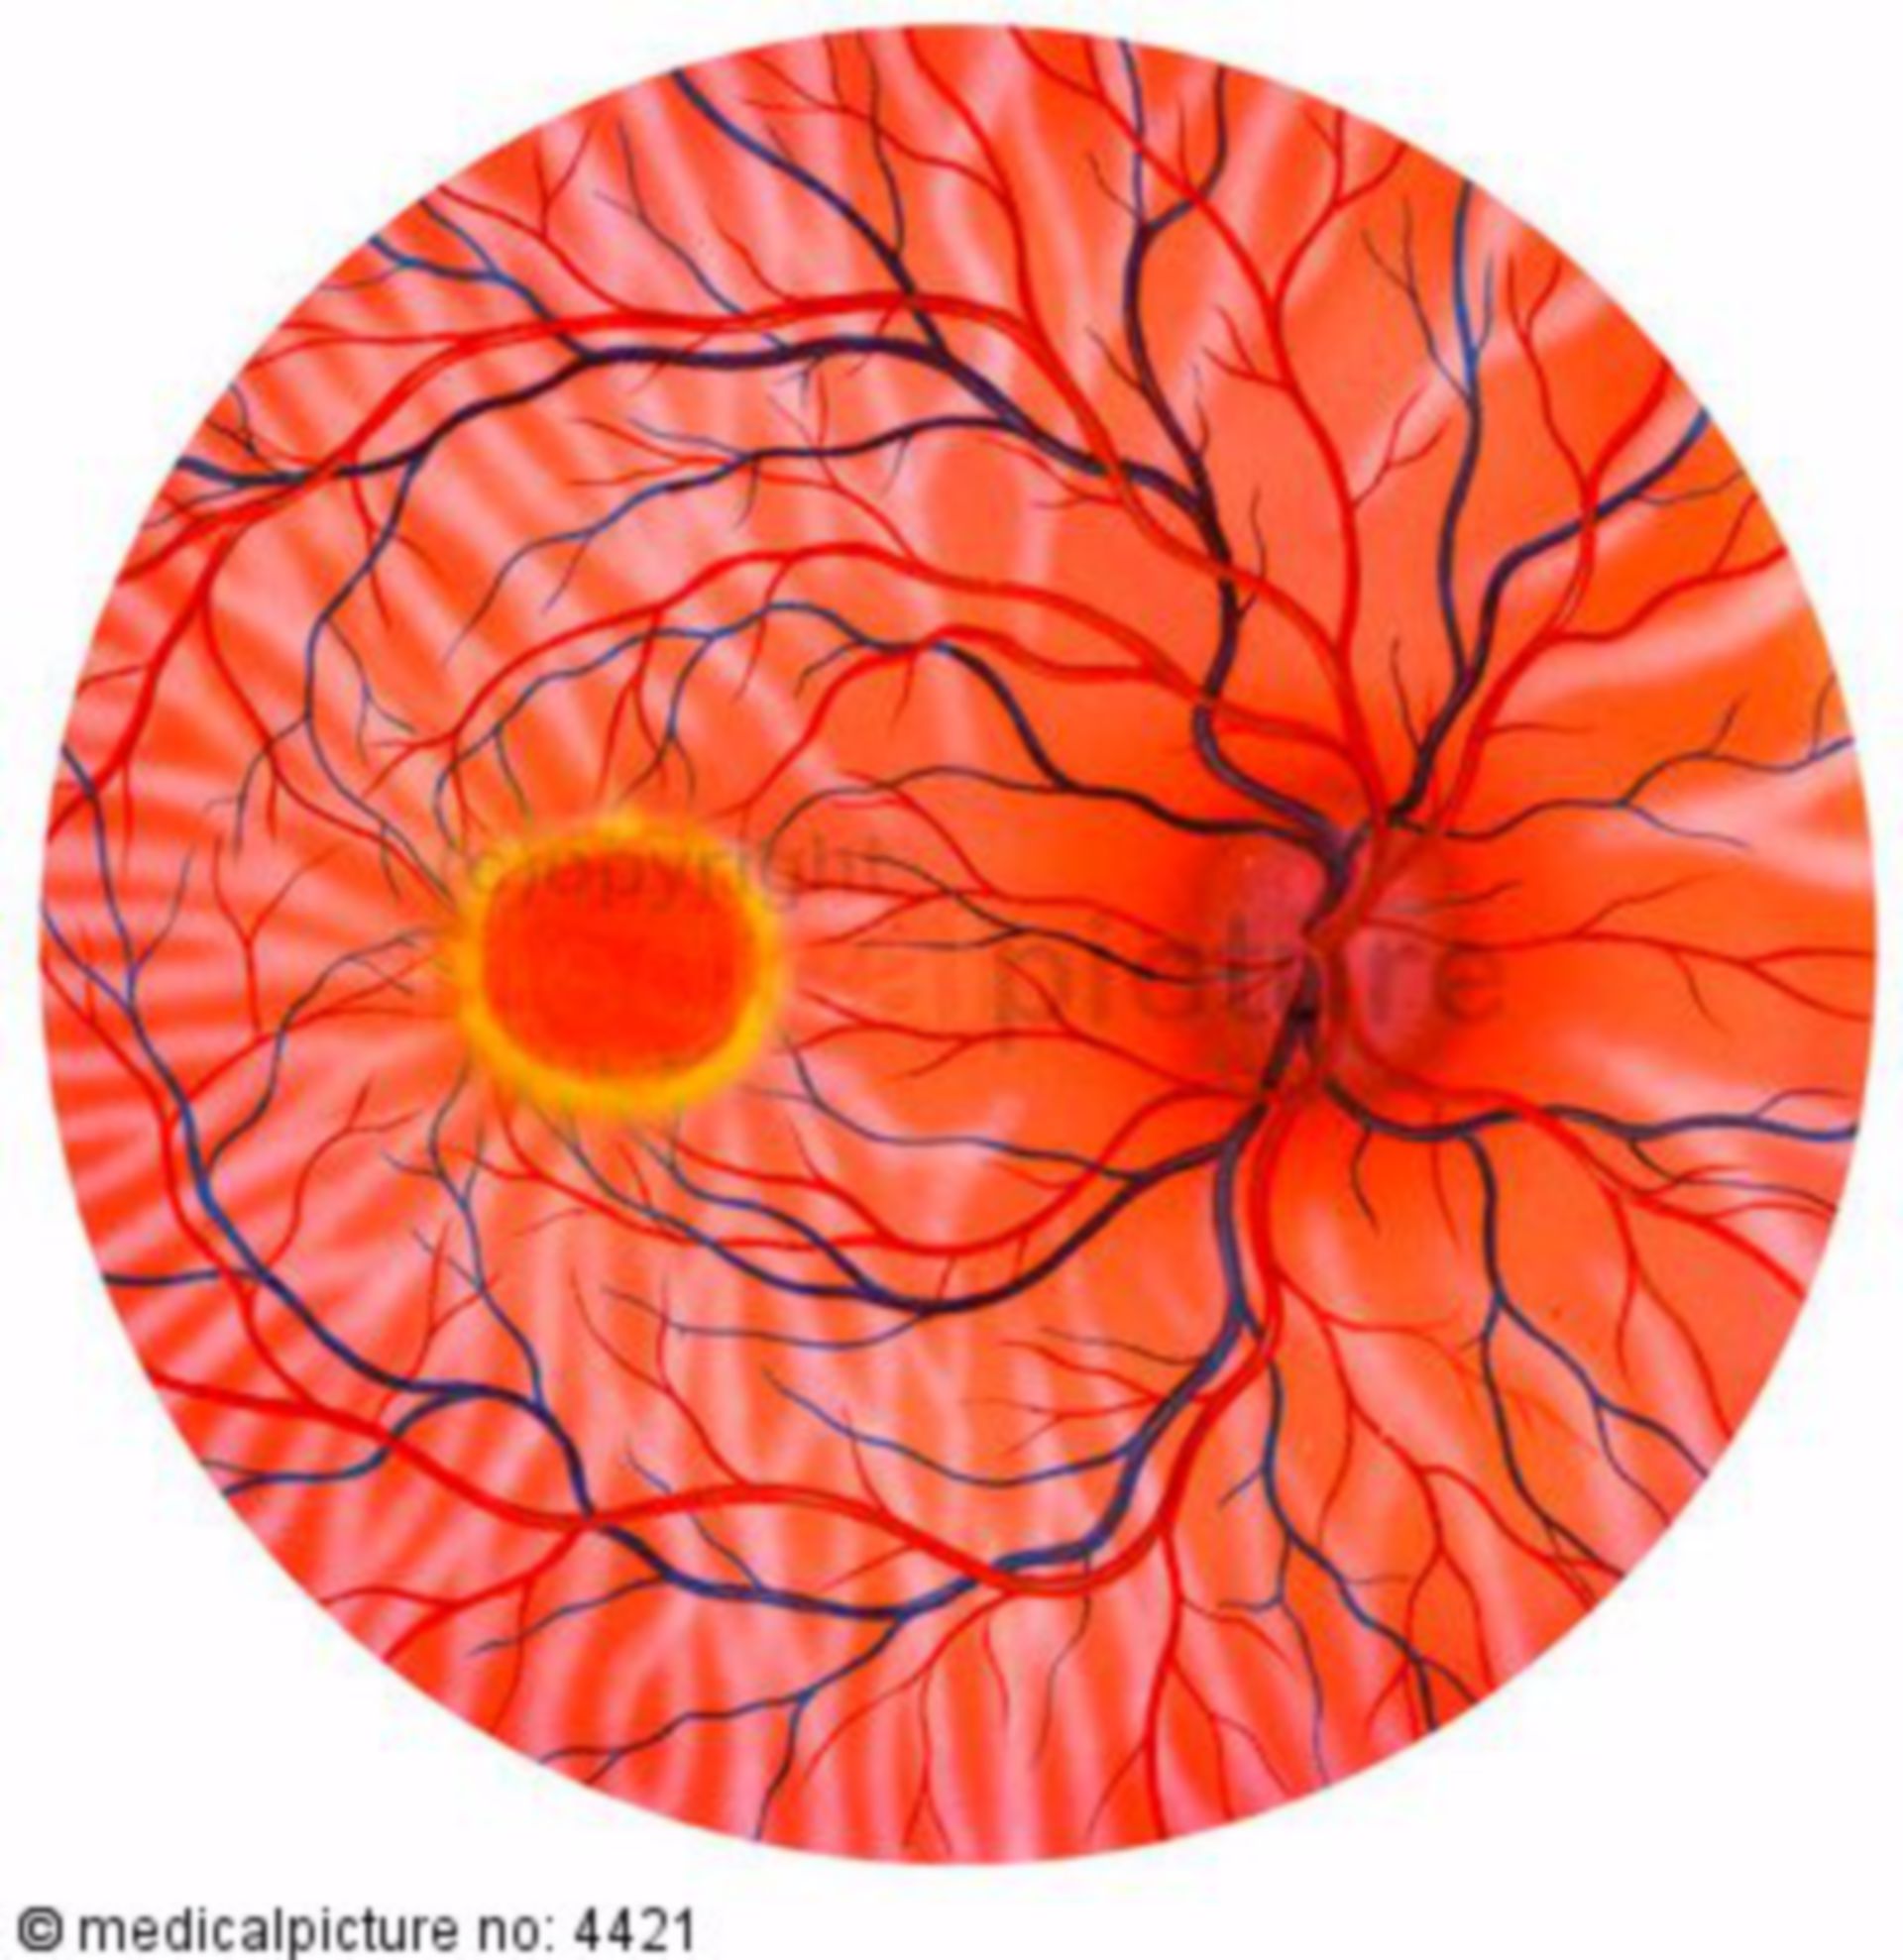 Fundus of the eye with retinopathy (illustration)